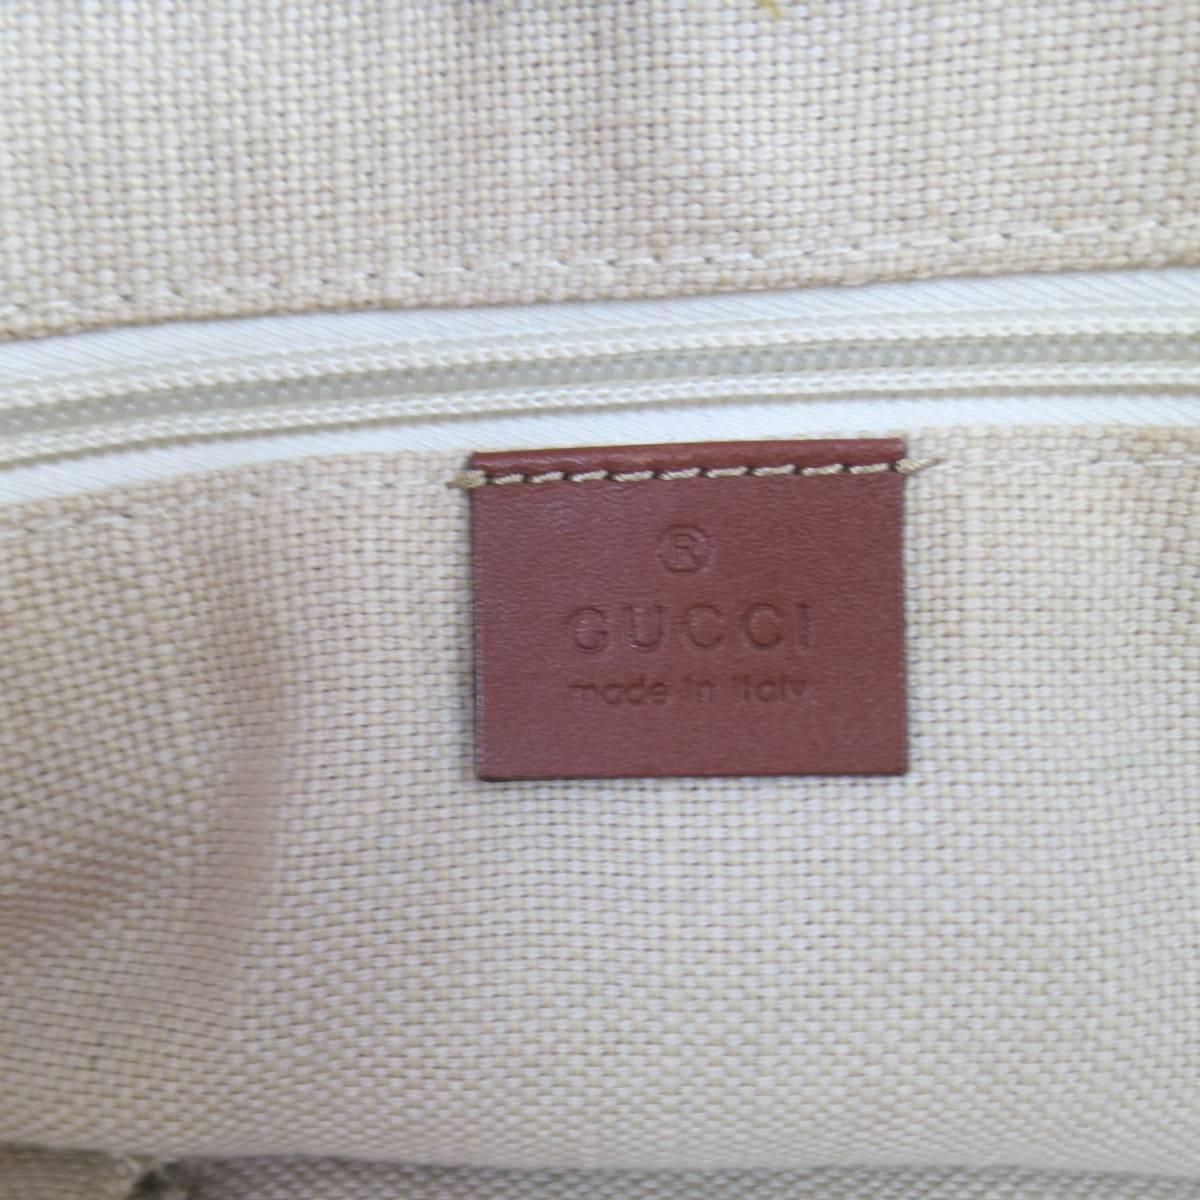 GUCCI Beige Canvas & Guccissima Embossed Leather Tote Bag 5